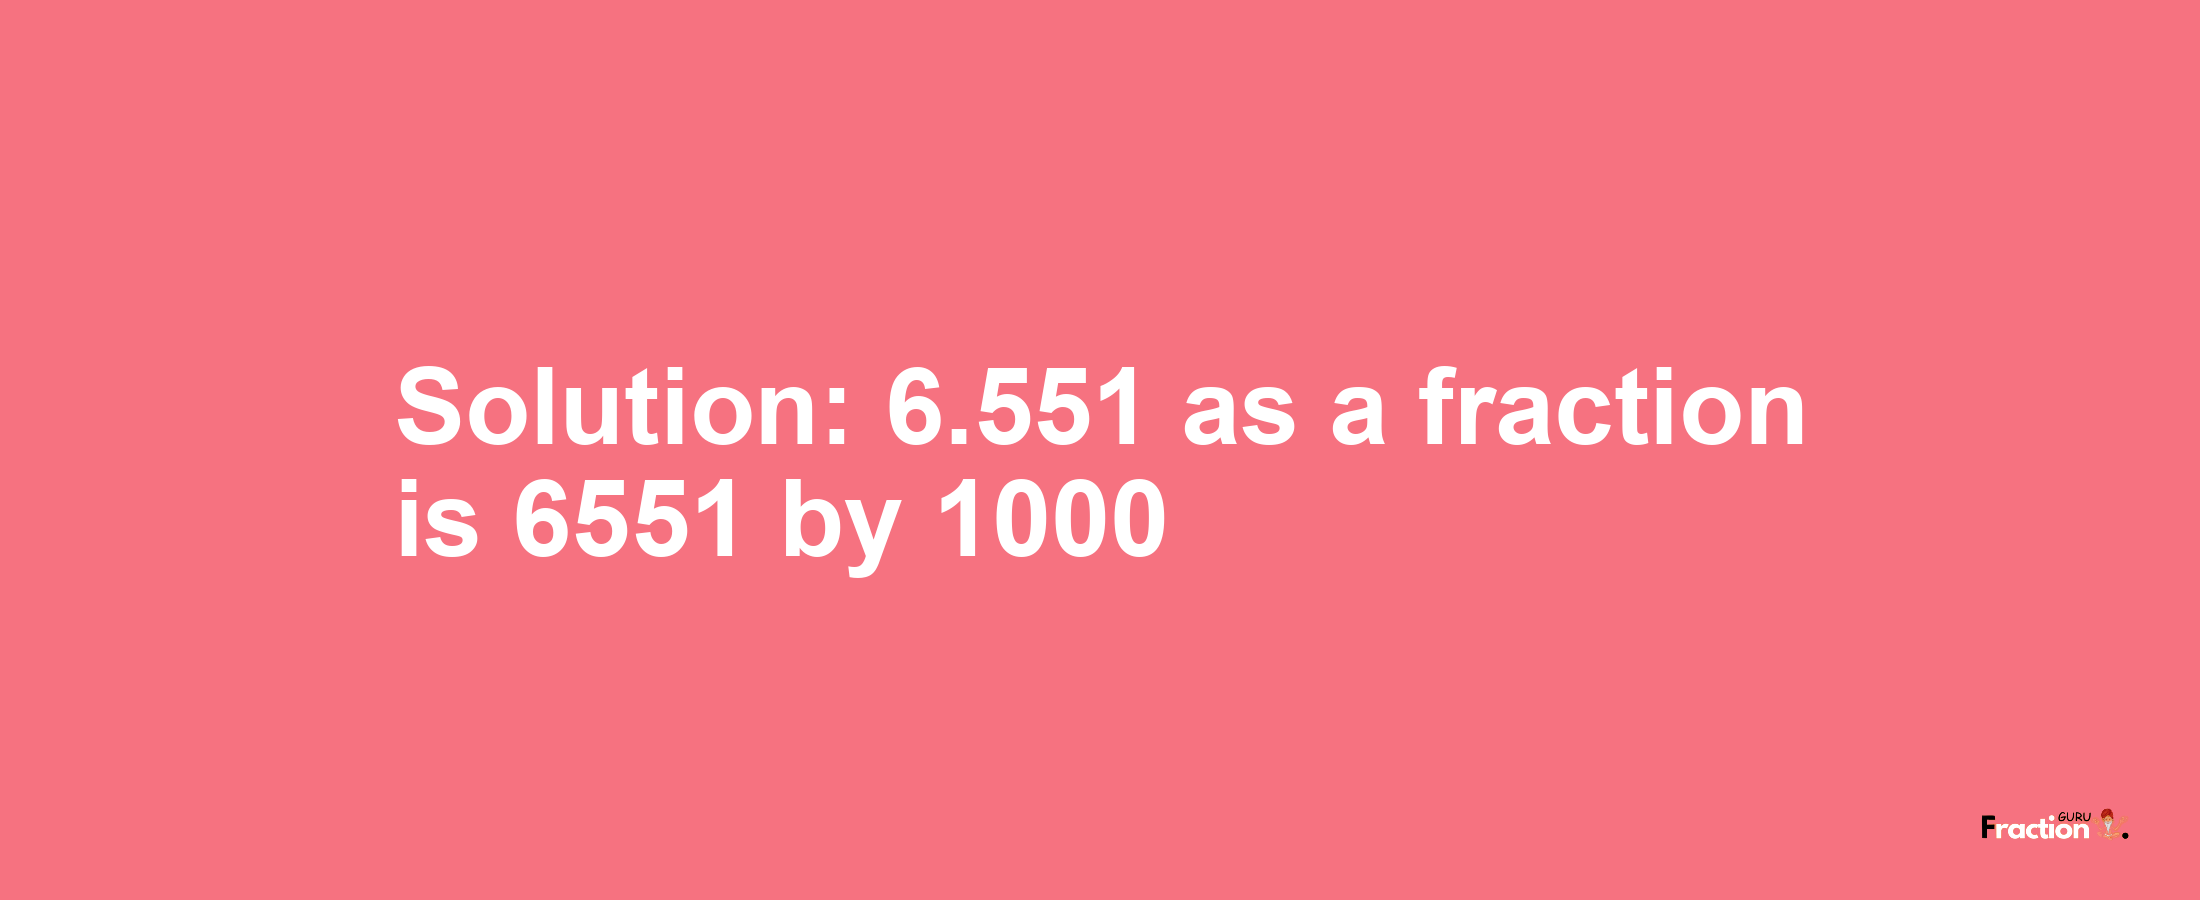 Solution:6.551 as a fraction is 6551/1000